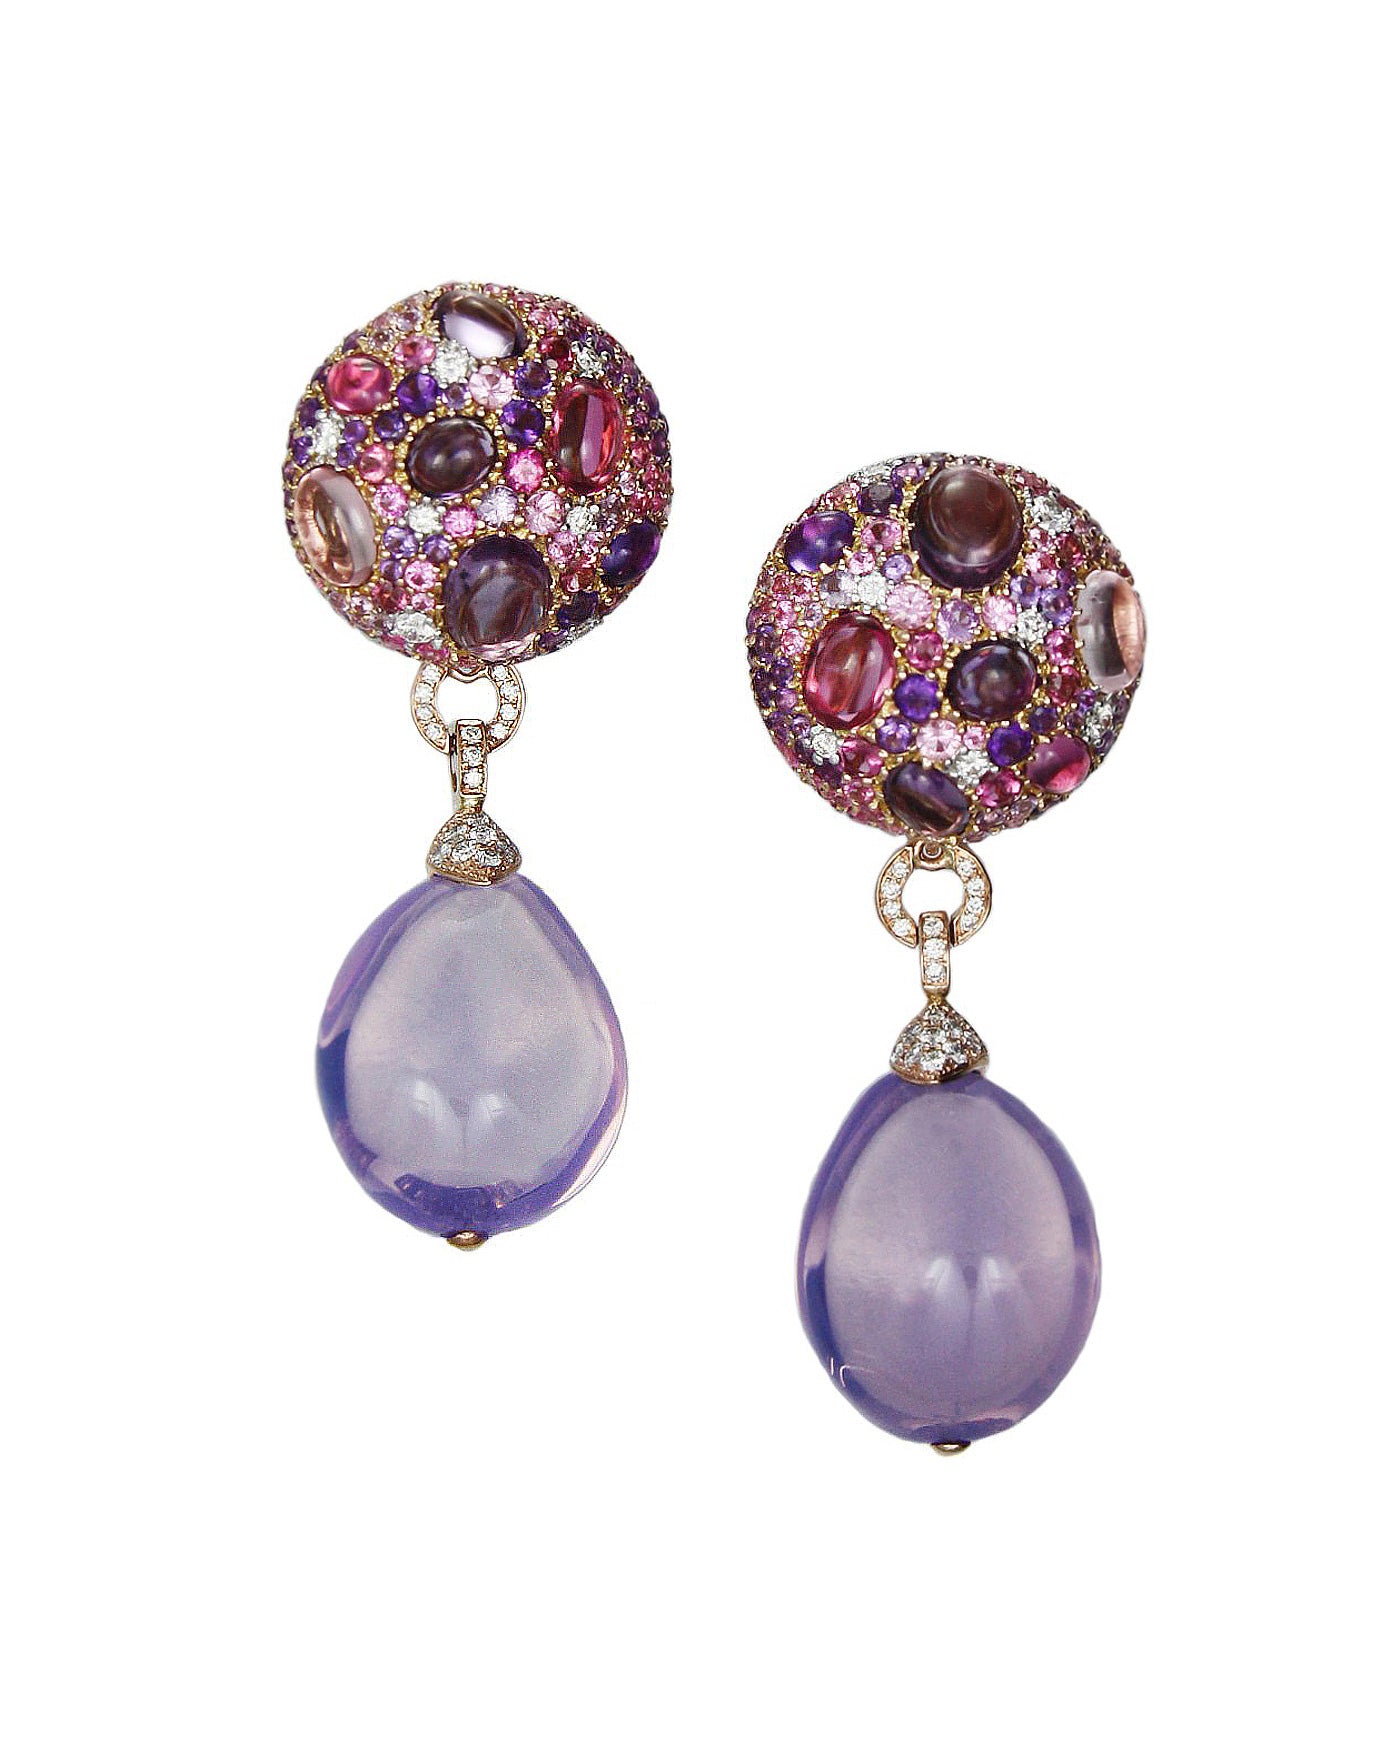 Purple moonstone cookie drop earrings enhanced with a myriad of gemstones and diamonds, crafted in 18 karat rose and white gold